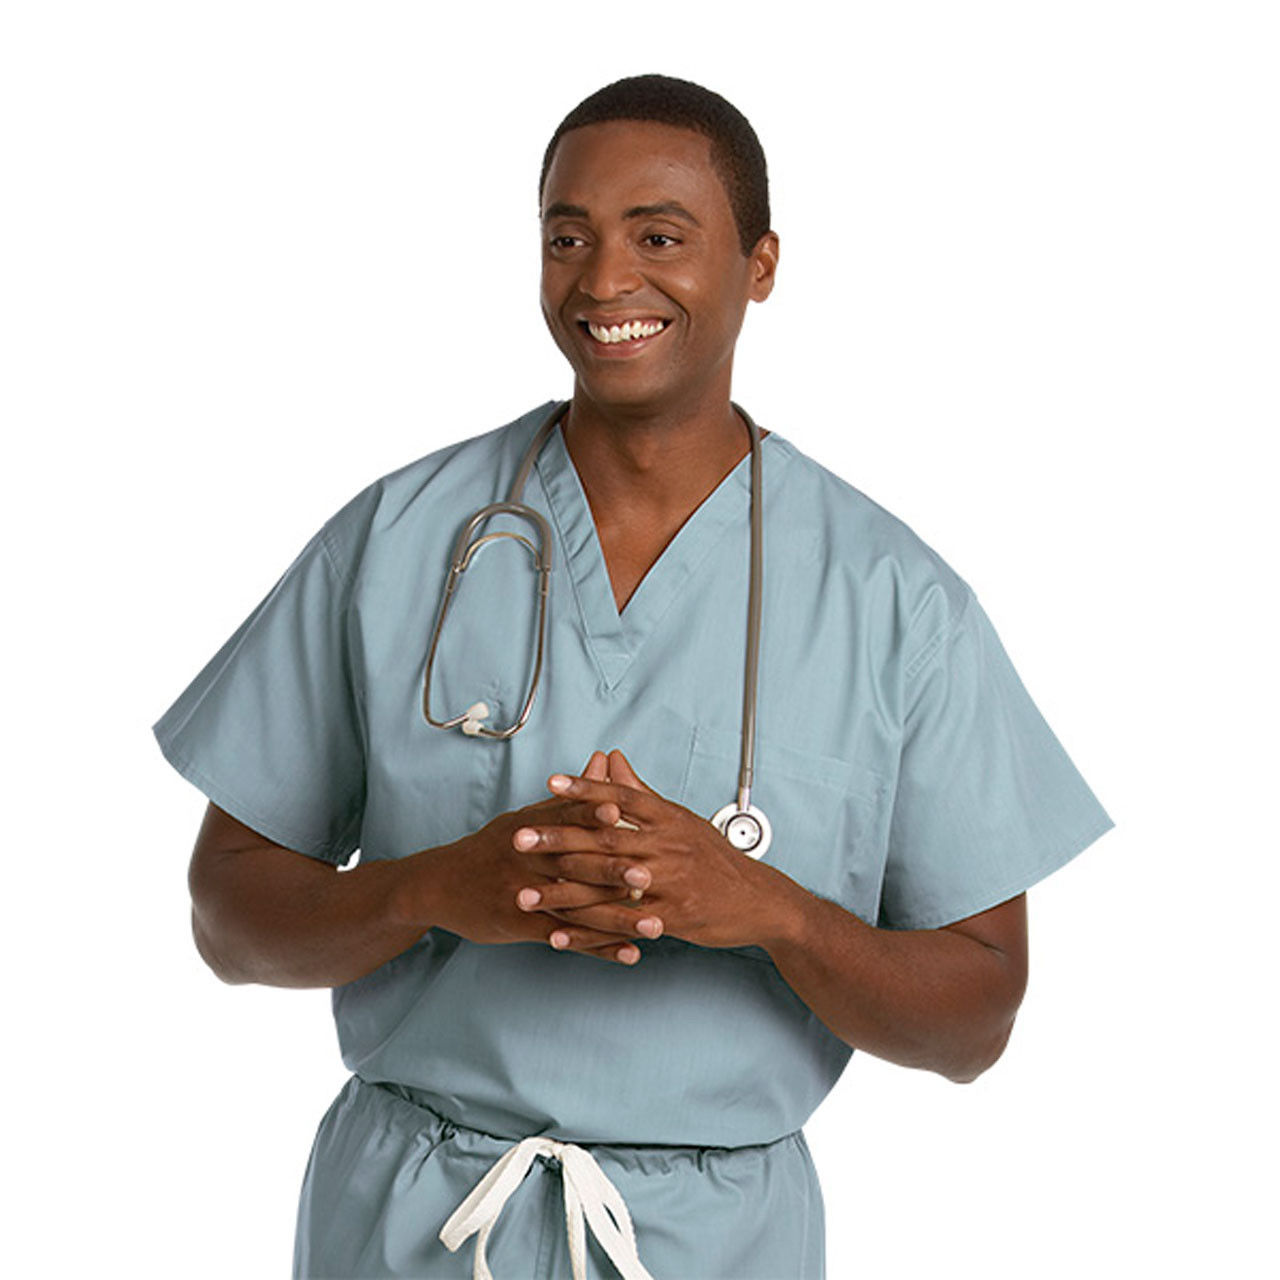 Do you know what color scrubs medical assistants wear?